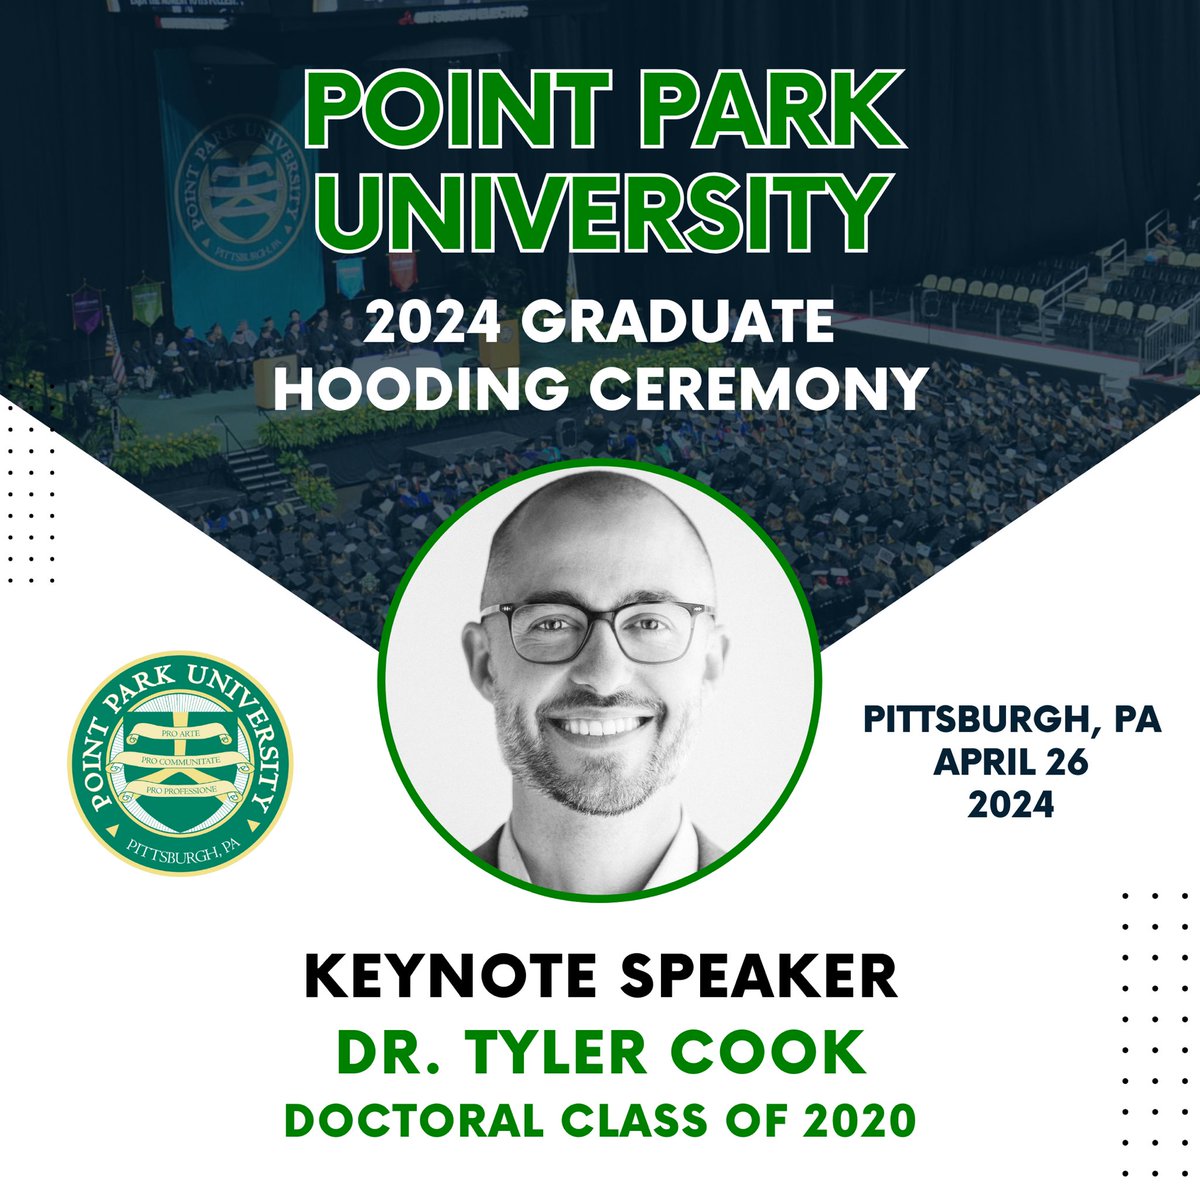 I am humbled and excited to be Point Park University’s Keynote Speaker for the Class of 2024’s Graduate Hooding Ceremony! My time in the Ed.D. program and the relationships I built with my cohort played an integral part in my leadership development. It is truly an honor to